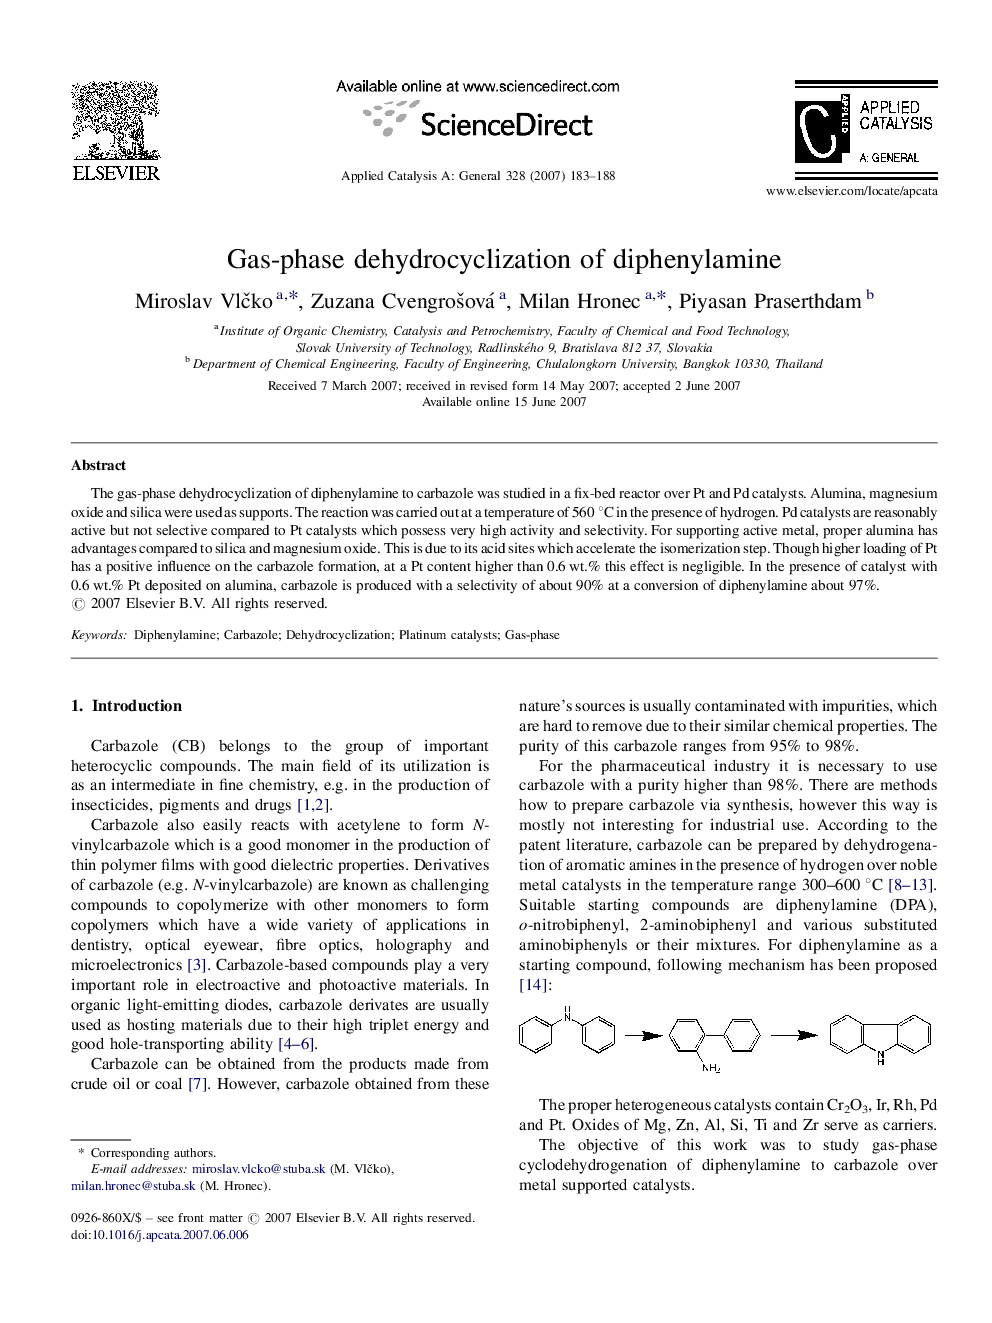 Gas-phase dehydrocyclization of diphenylamine